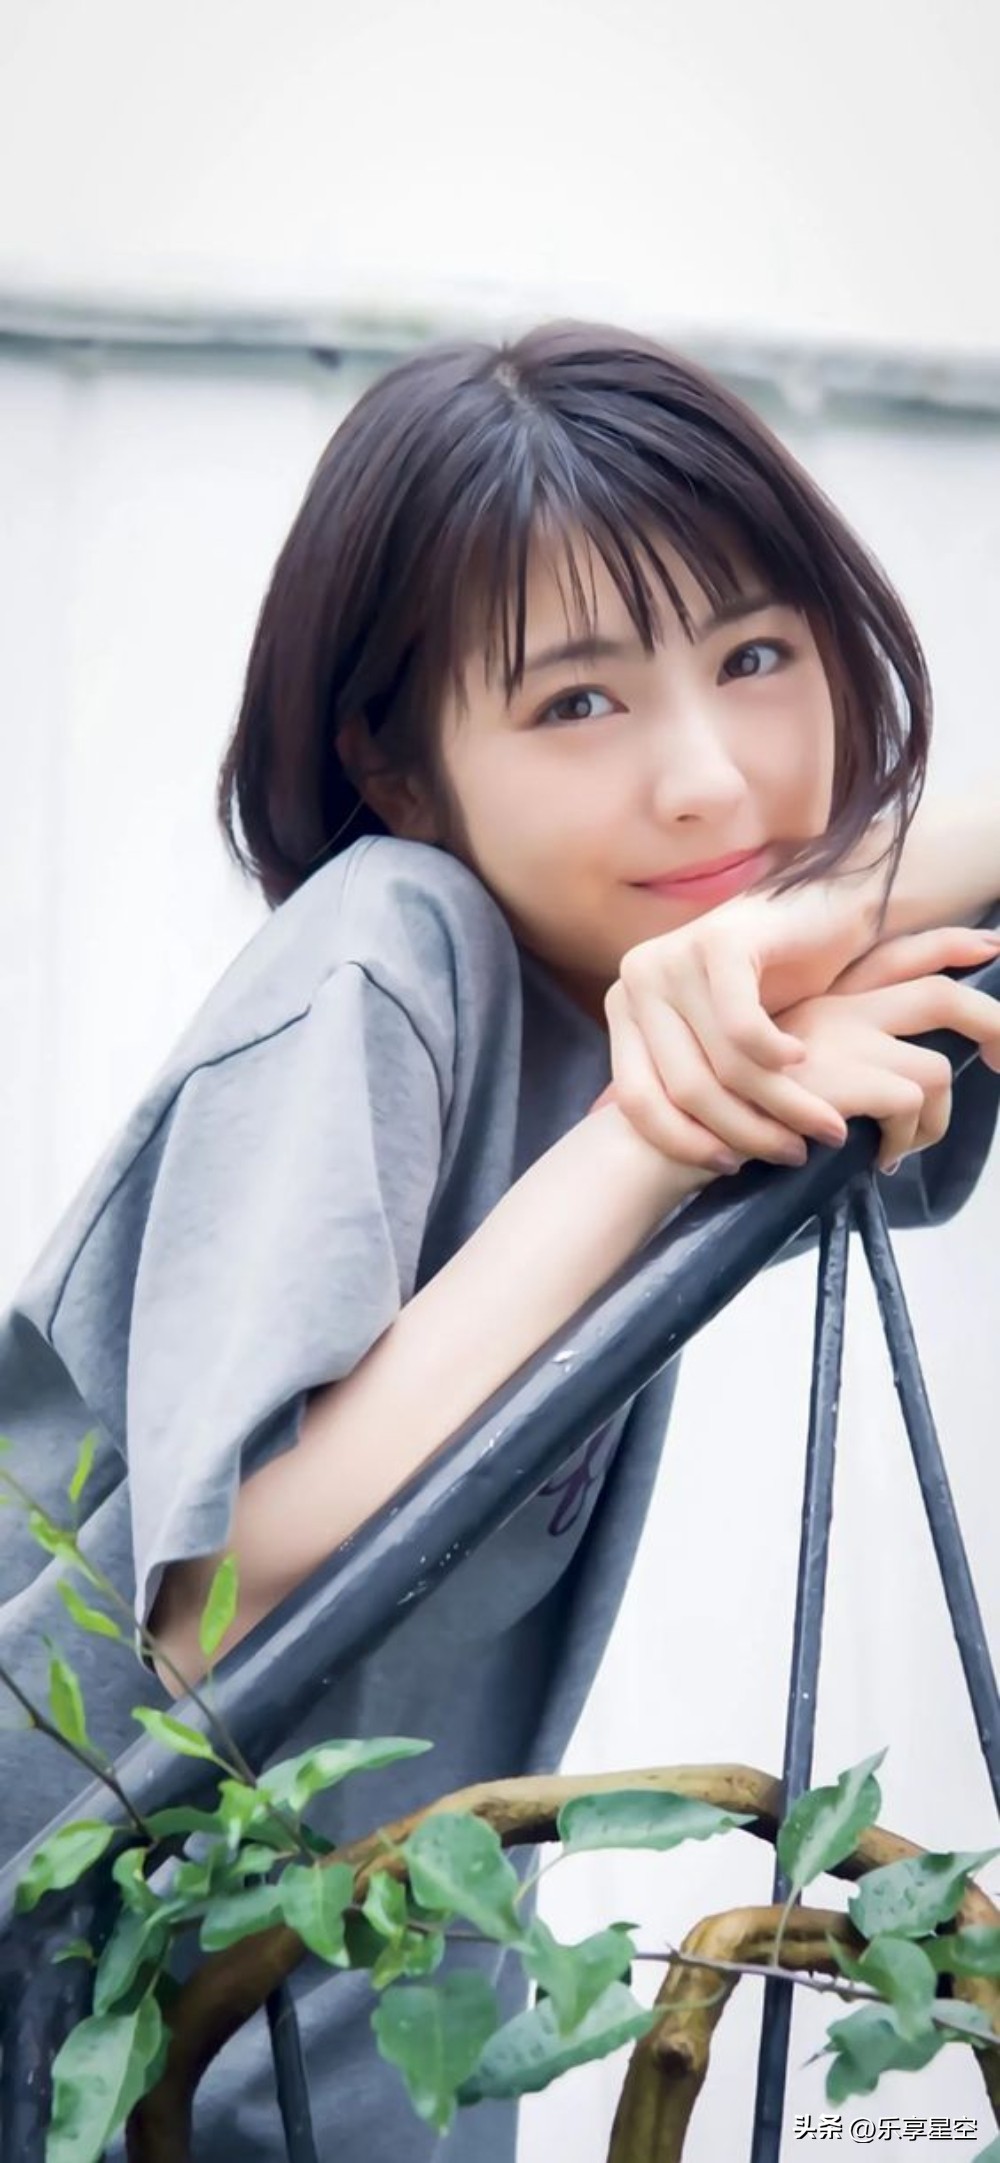 Minami Hamabe A Popular Actress In Japans Charts With A Ceiling Of Beauty Inews